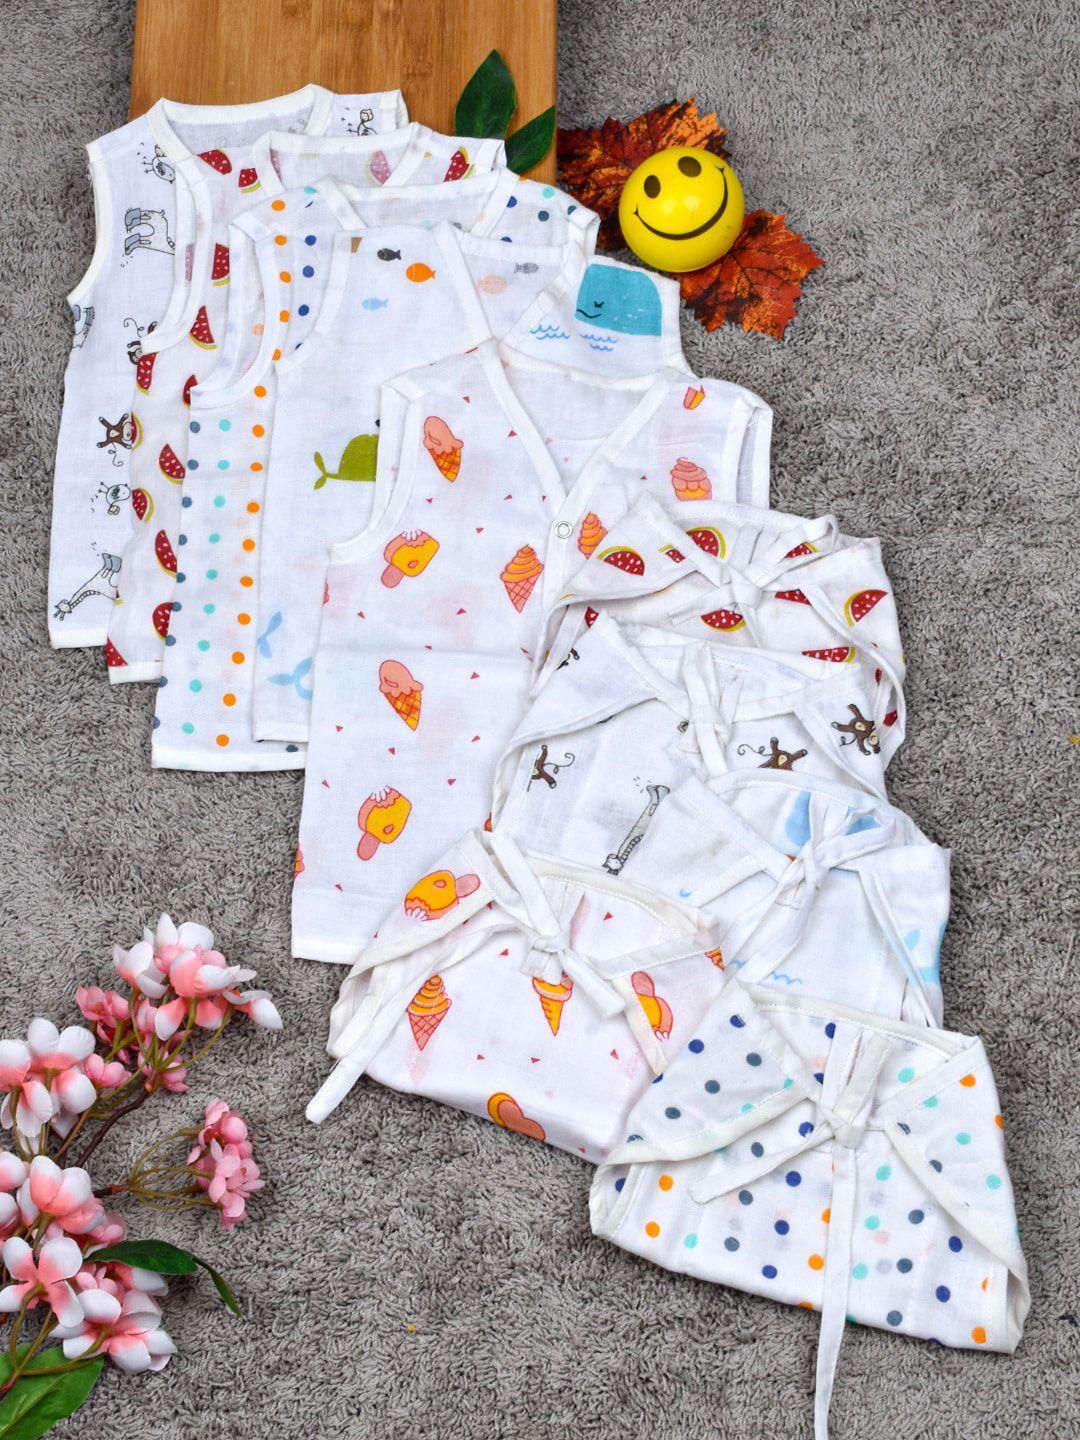 moms home infants set of 5 printed organic cotton muslin jhabla with nappy